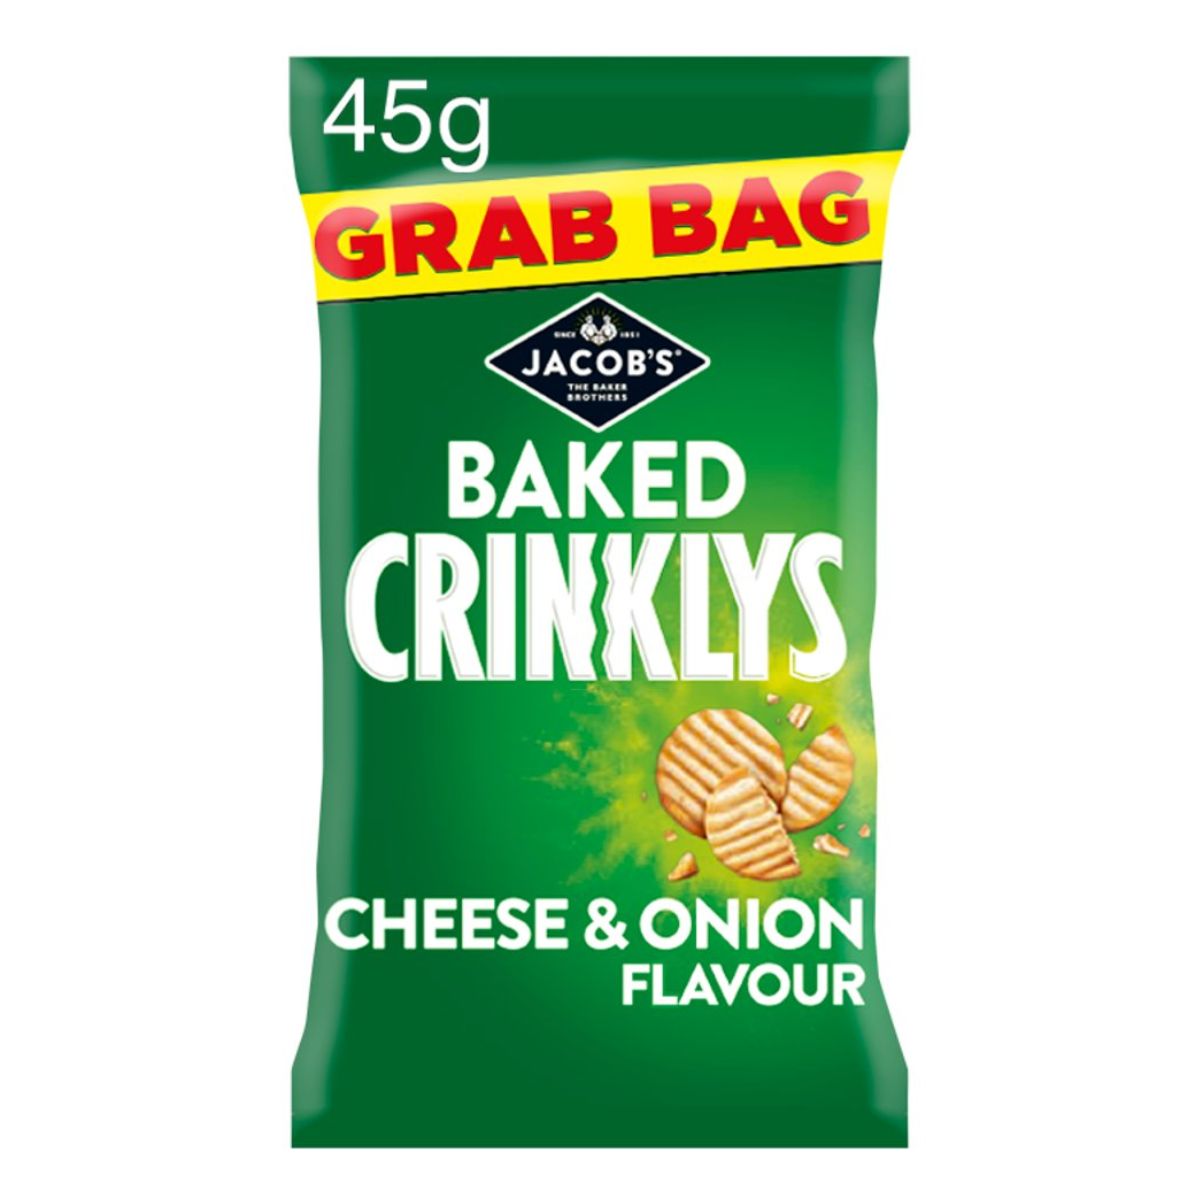 Jacobs - Baked Crinklys Cheese & Onion Grab Bag - 45g.